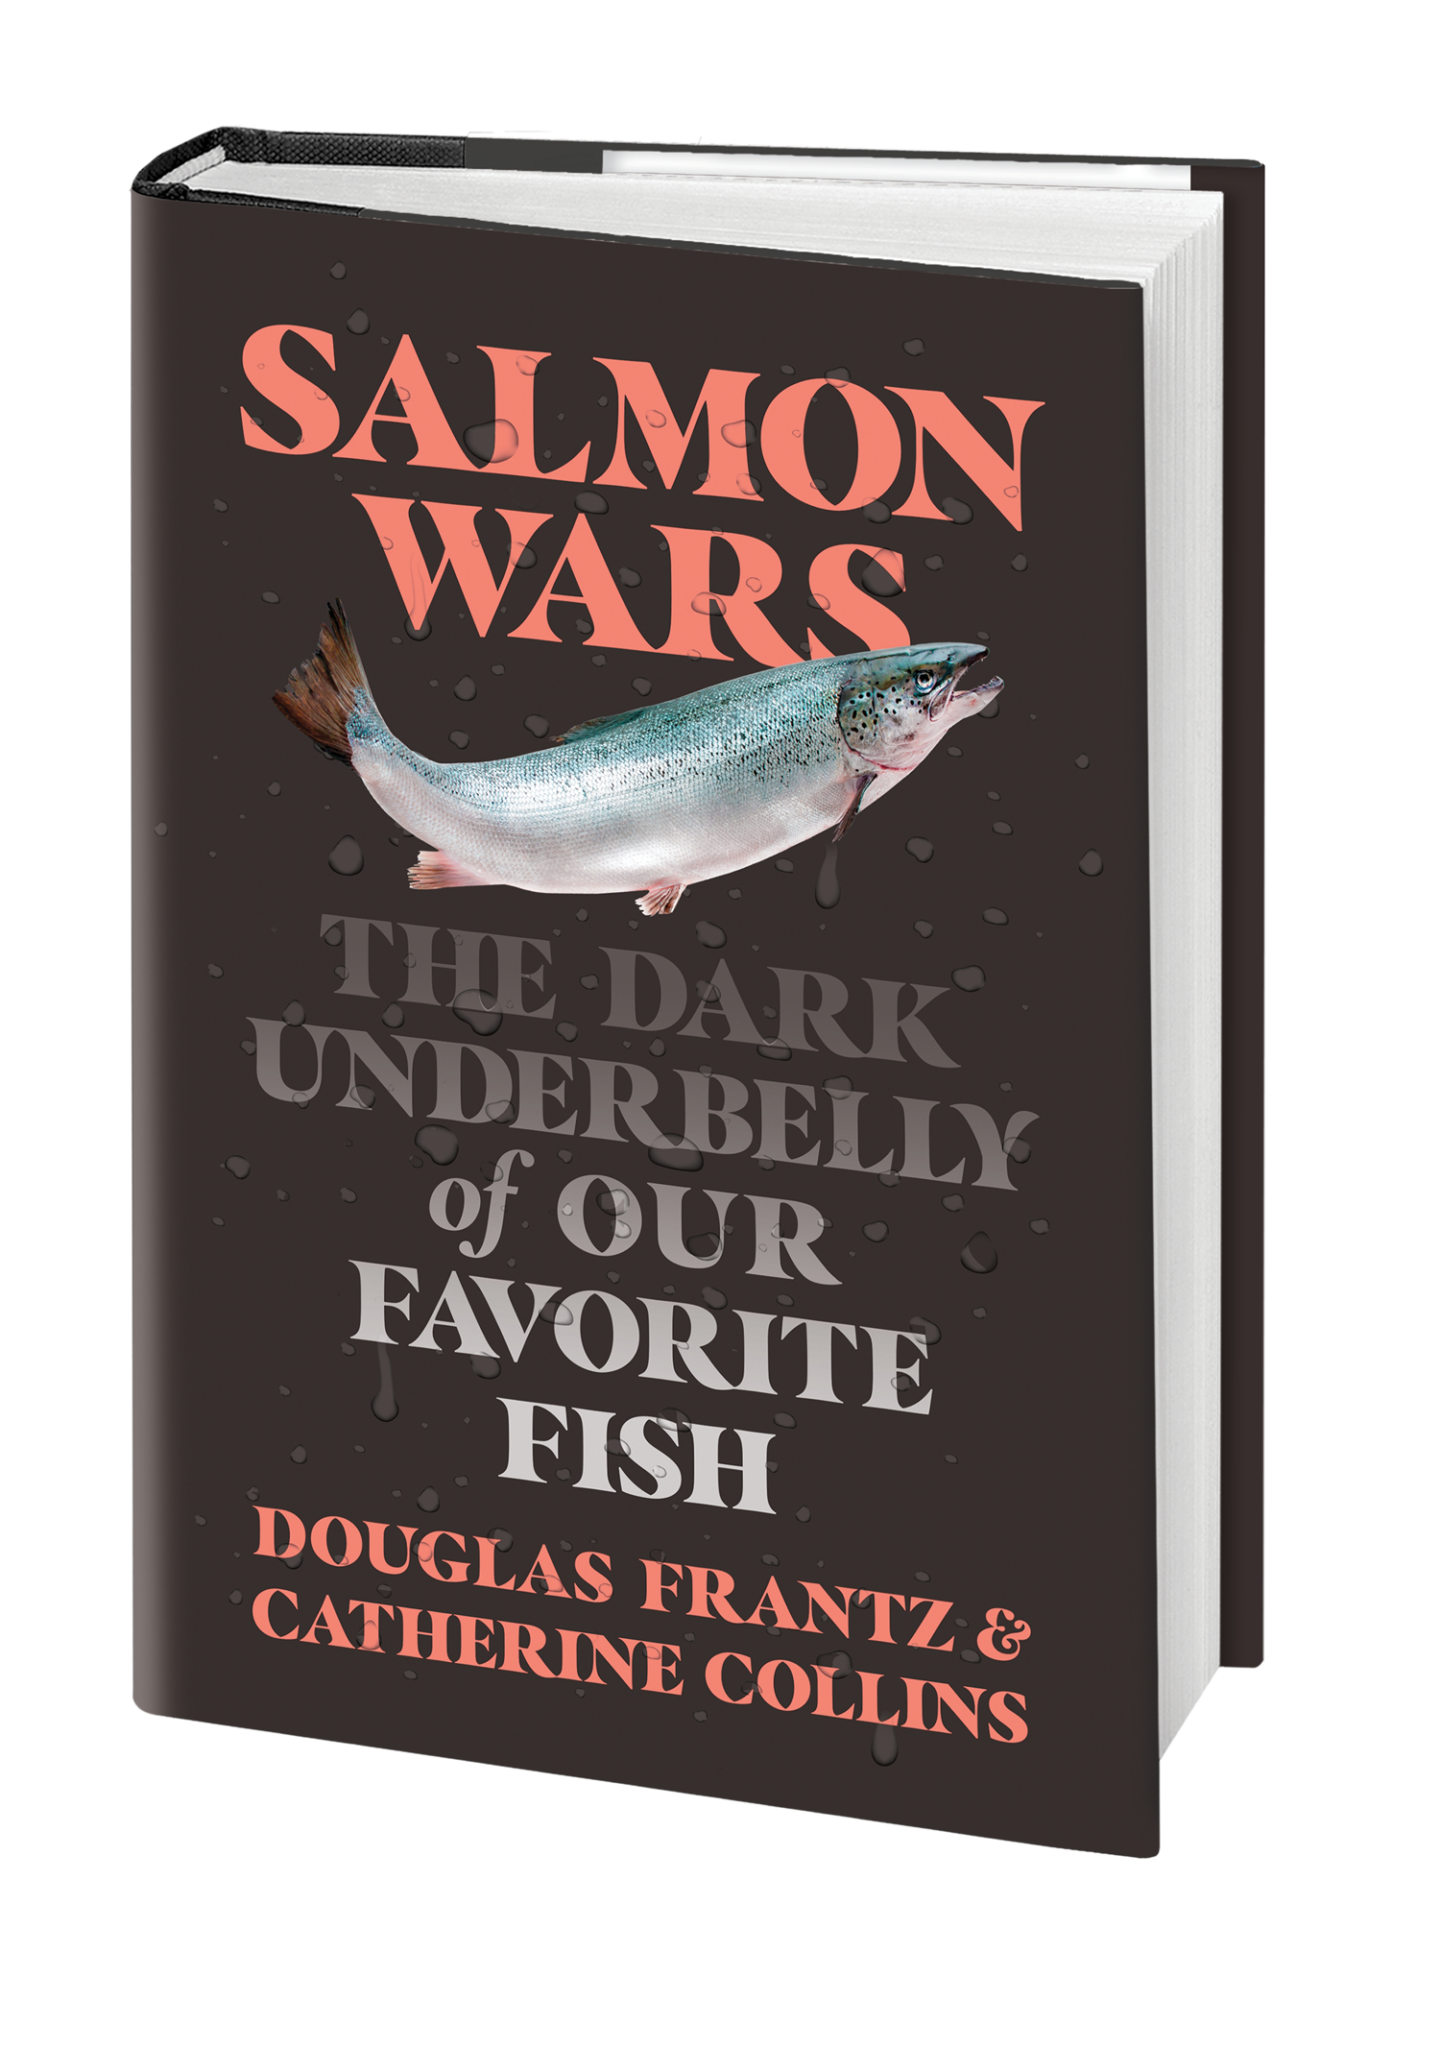 https://wildfishconservancy.org/wp-content/uploads/2022/07/Salmon-Wars-2-1440x2048.png